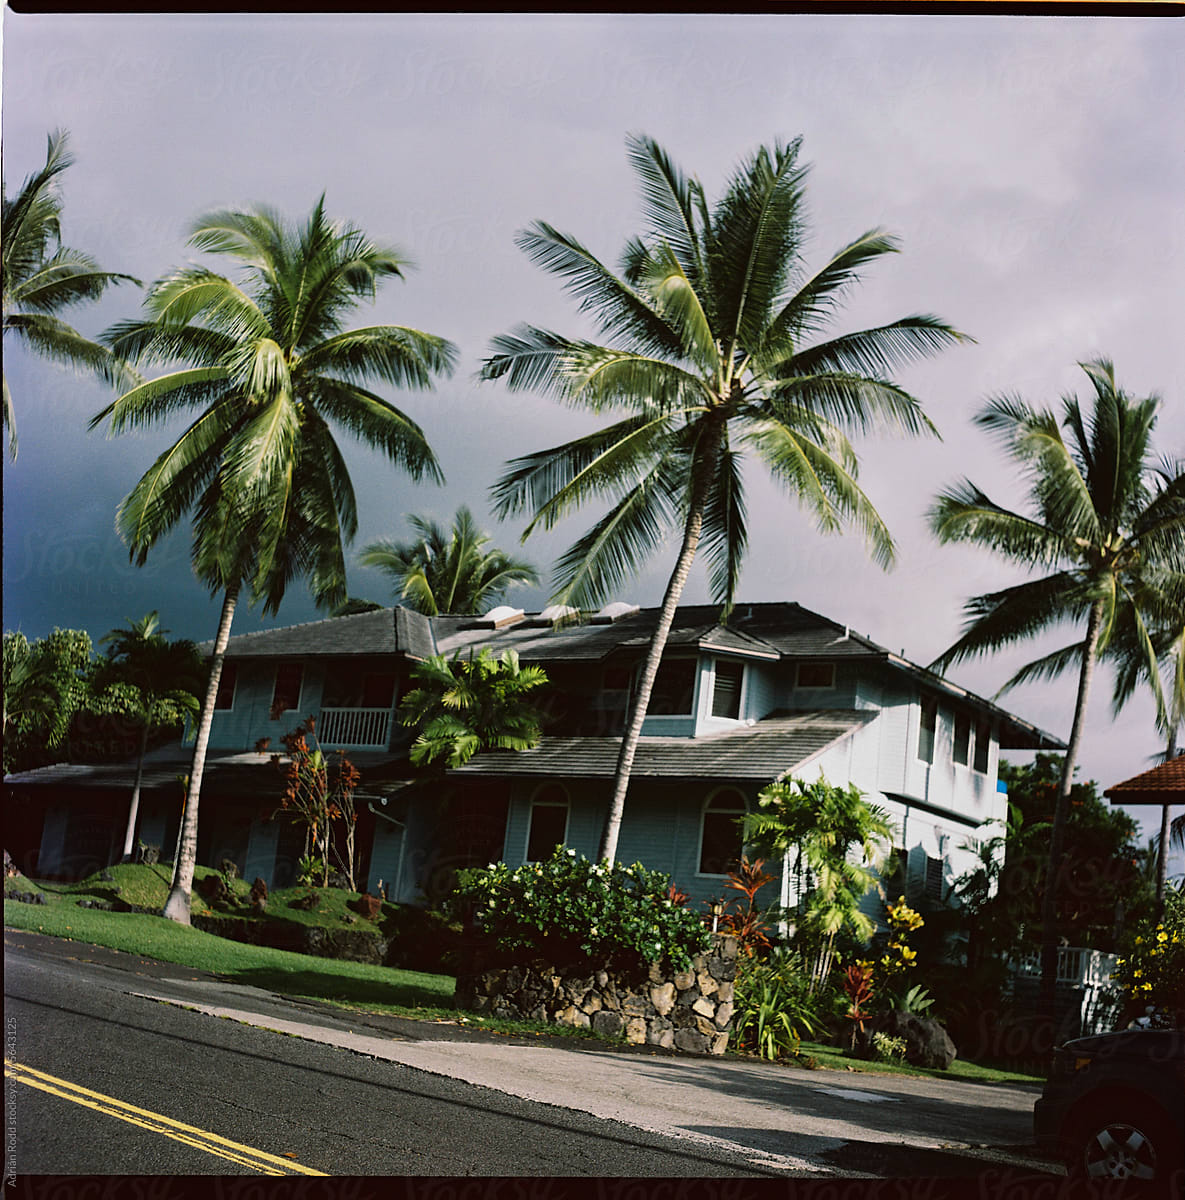 House Surrounded by Palm Trees, Shot on 120mm Film